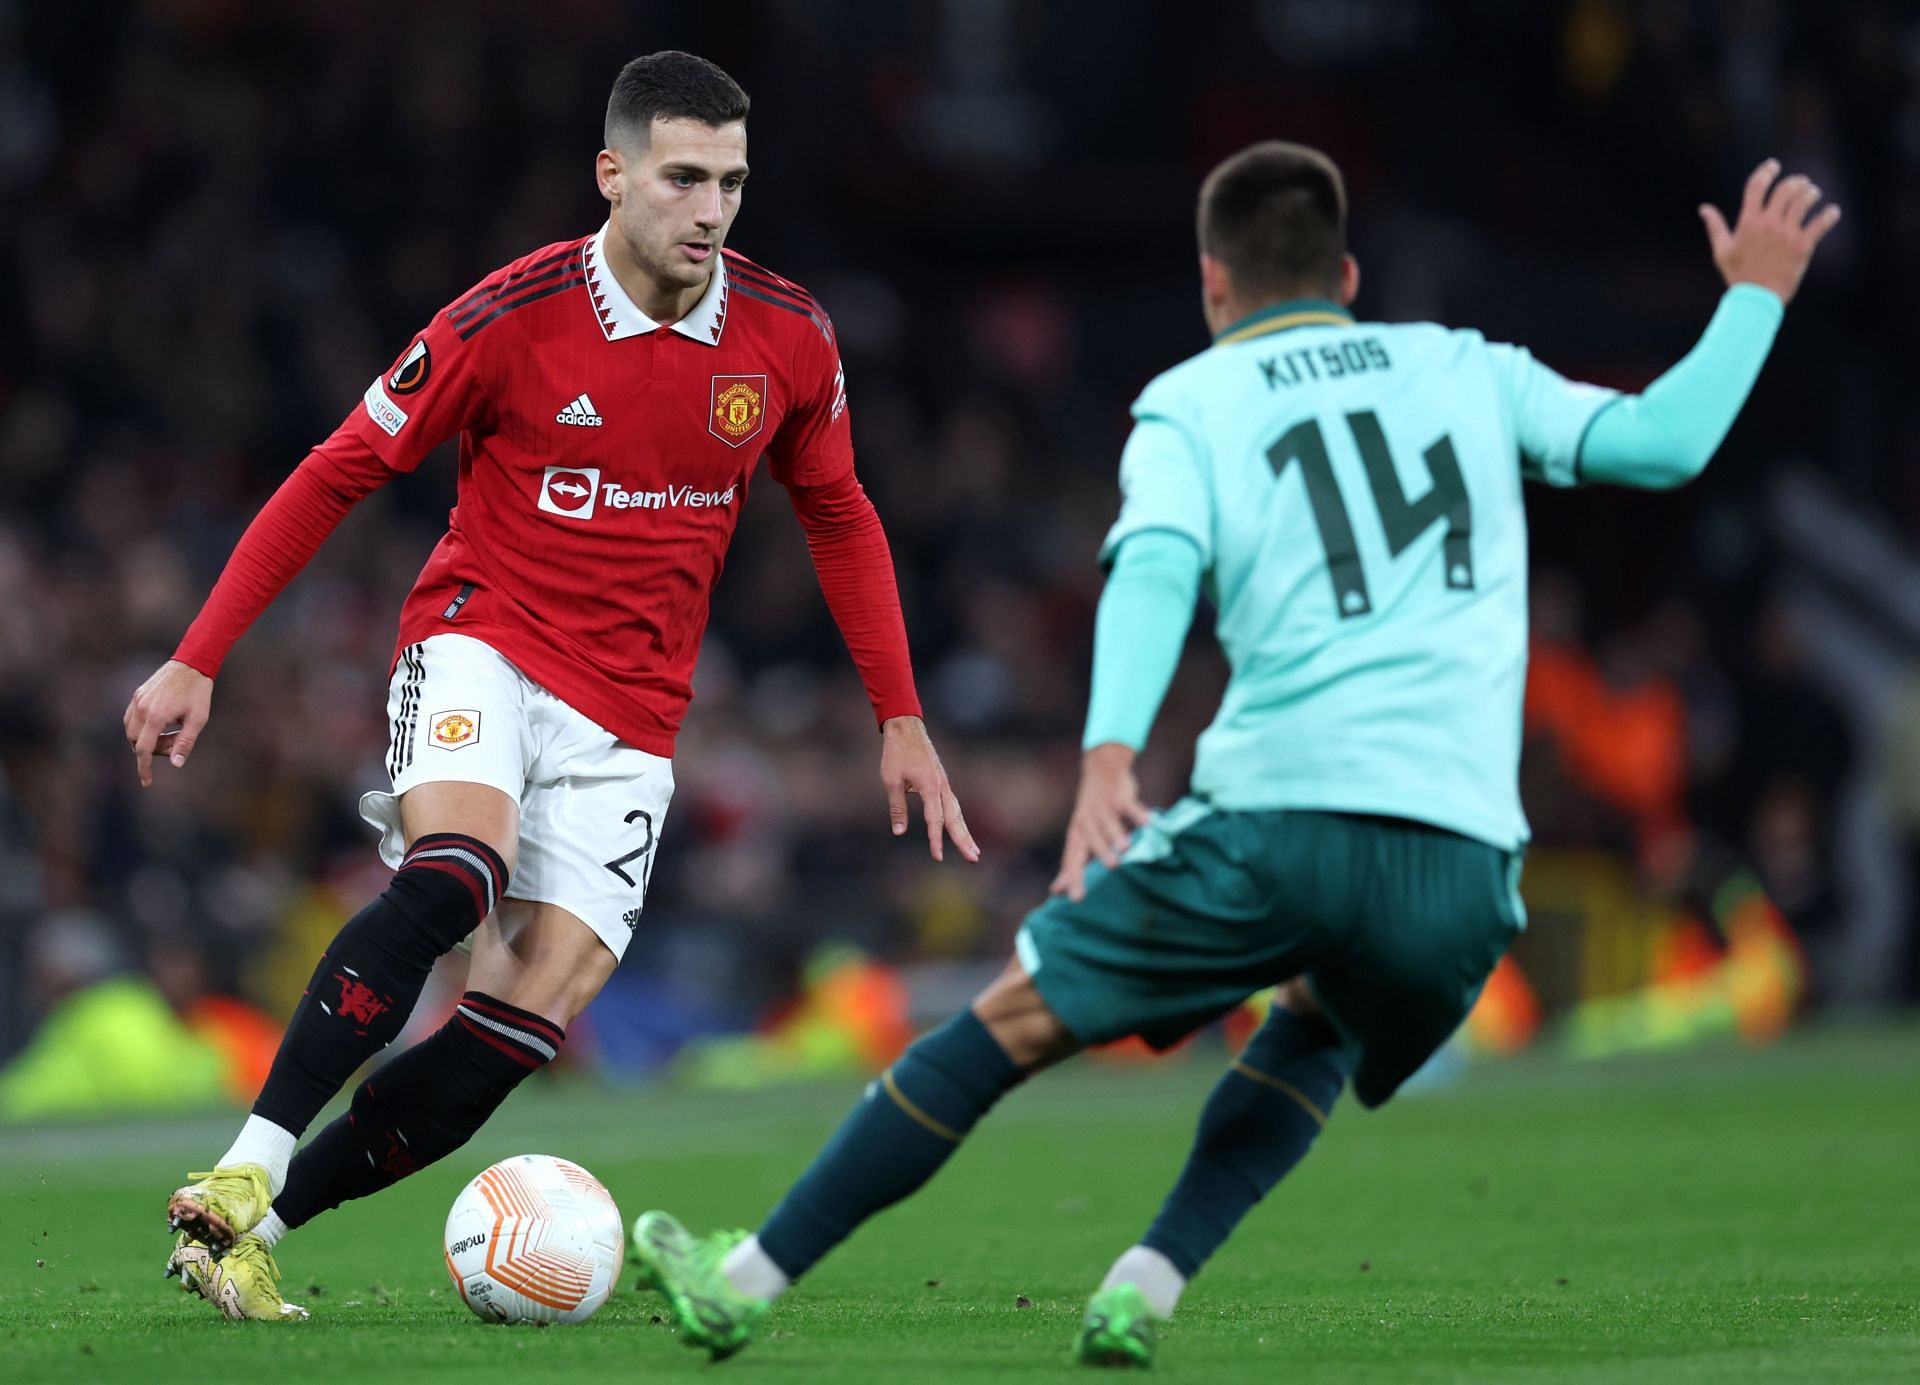 Diogo Dalot (left) wants to extend his stay at Old Trafford.